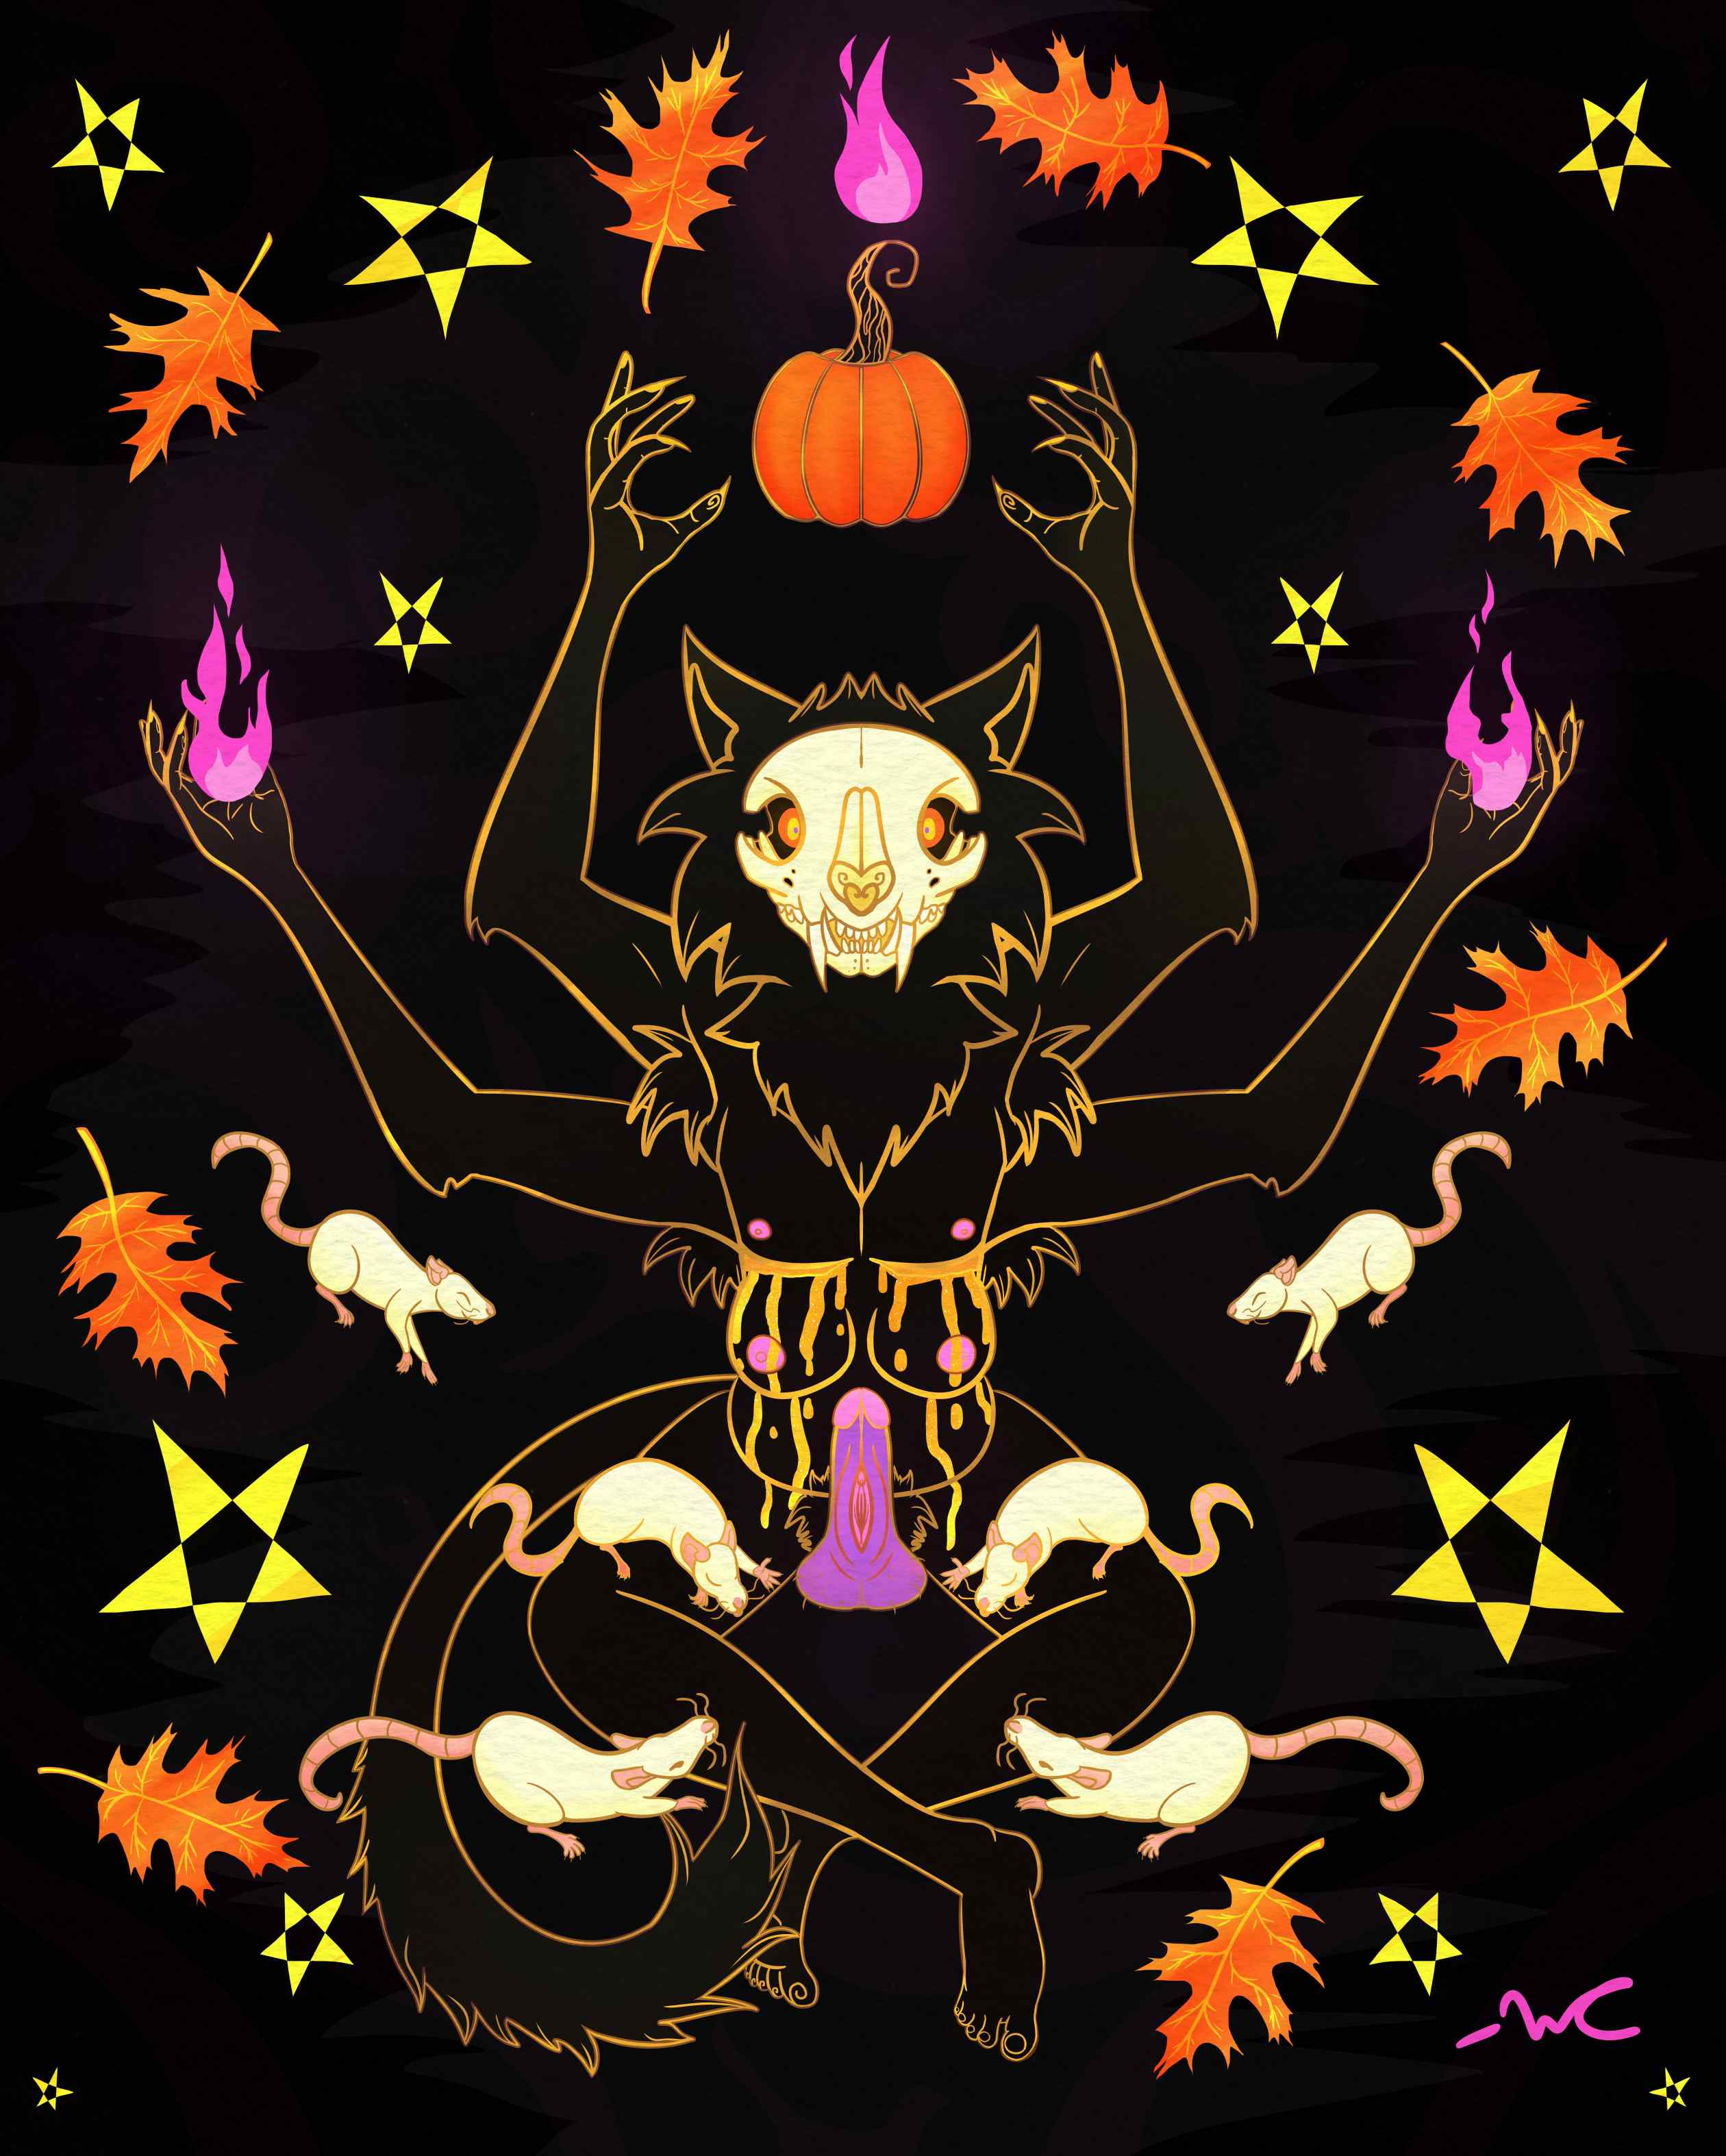 A hermpaphroditic feline-like deity with a skull face. They have four arms, and are holding purple flames. Above their head is a pumpkin. They are being worshipped by white rats, and they're surrounded by autumn leaves and stars.